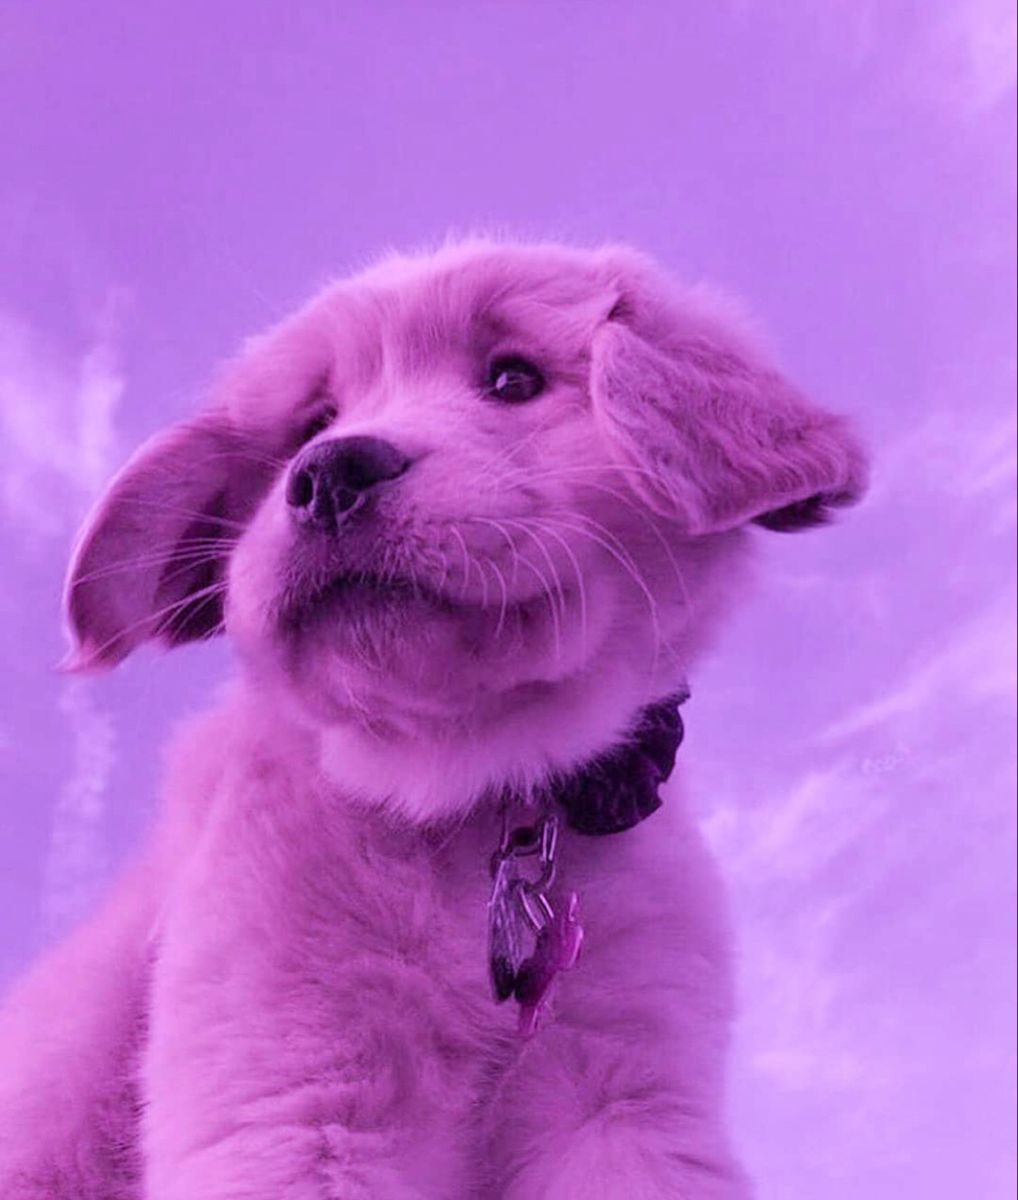 Purple aesthetic. Cute puppy wallpaper, Cute animal photo, Baby animals picture